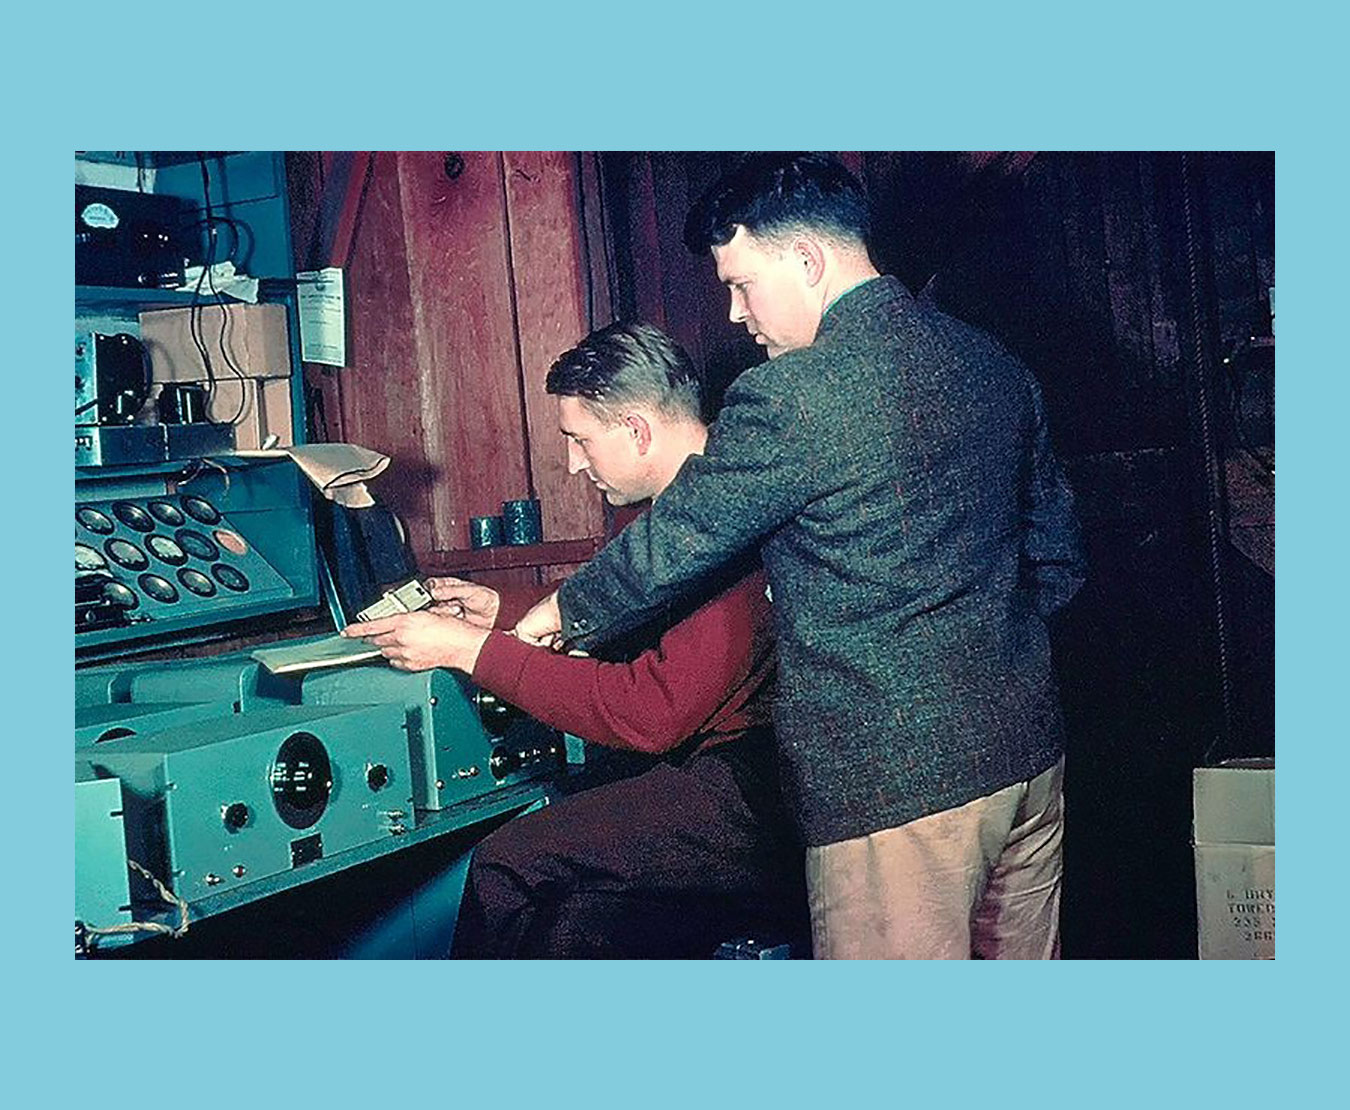 The evolution of manufacturing accelrated in the computer age - here David Packard and Bill Hewlett found their company in a Palo Alto, California garage. Their first product, the HP 200A Audio Oscillator, rapidly became a popular piece of test equipment for engineers.